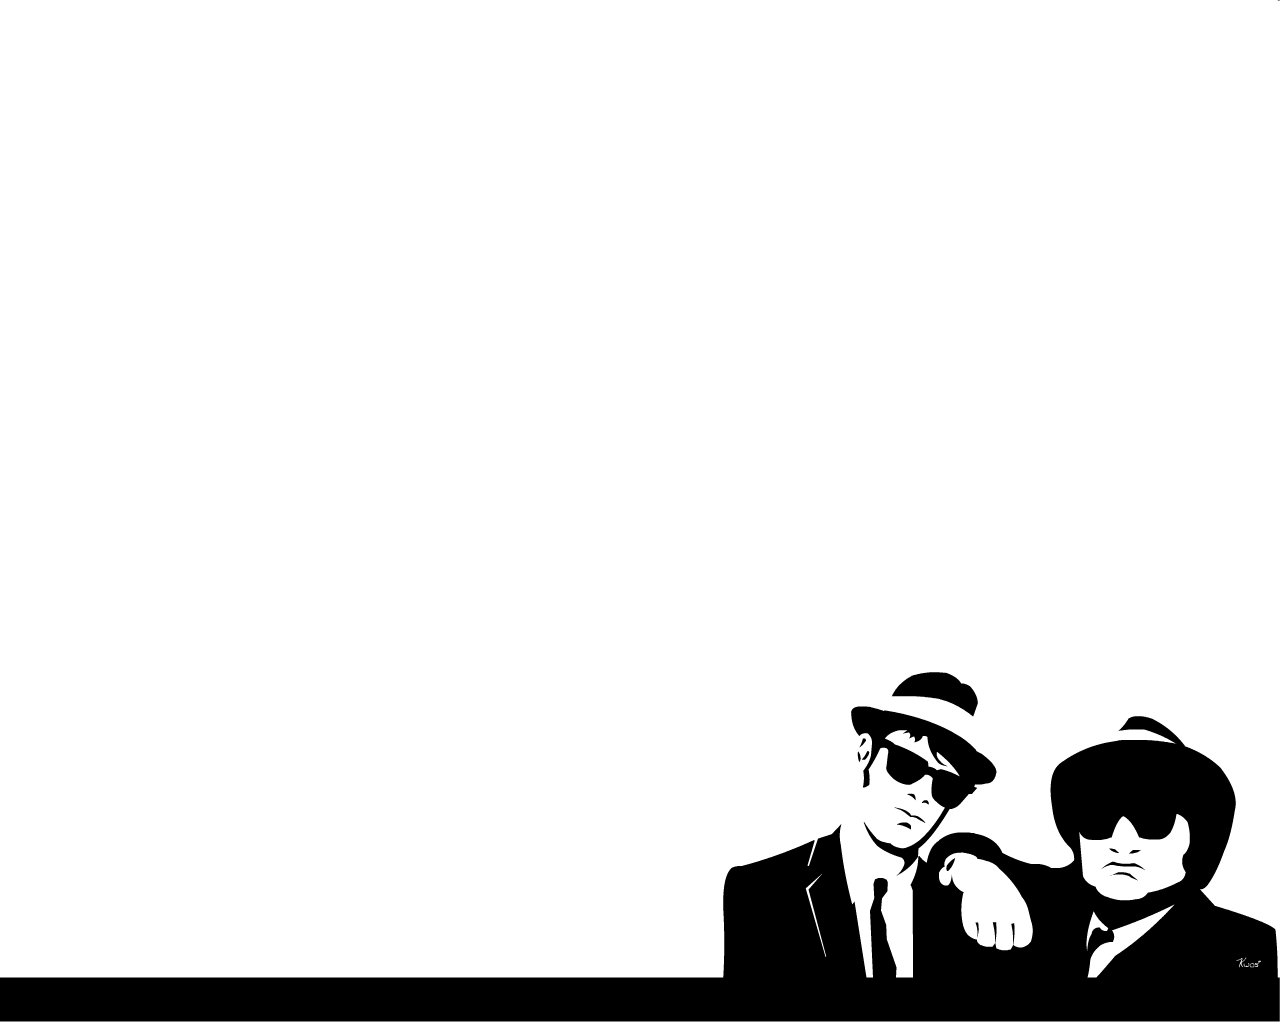 Drawn background   The Blues Brothers Wallpaper 3756409